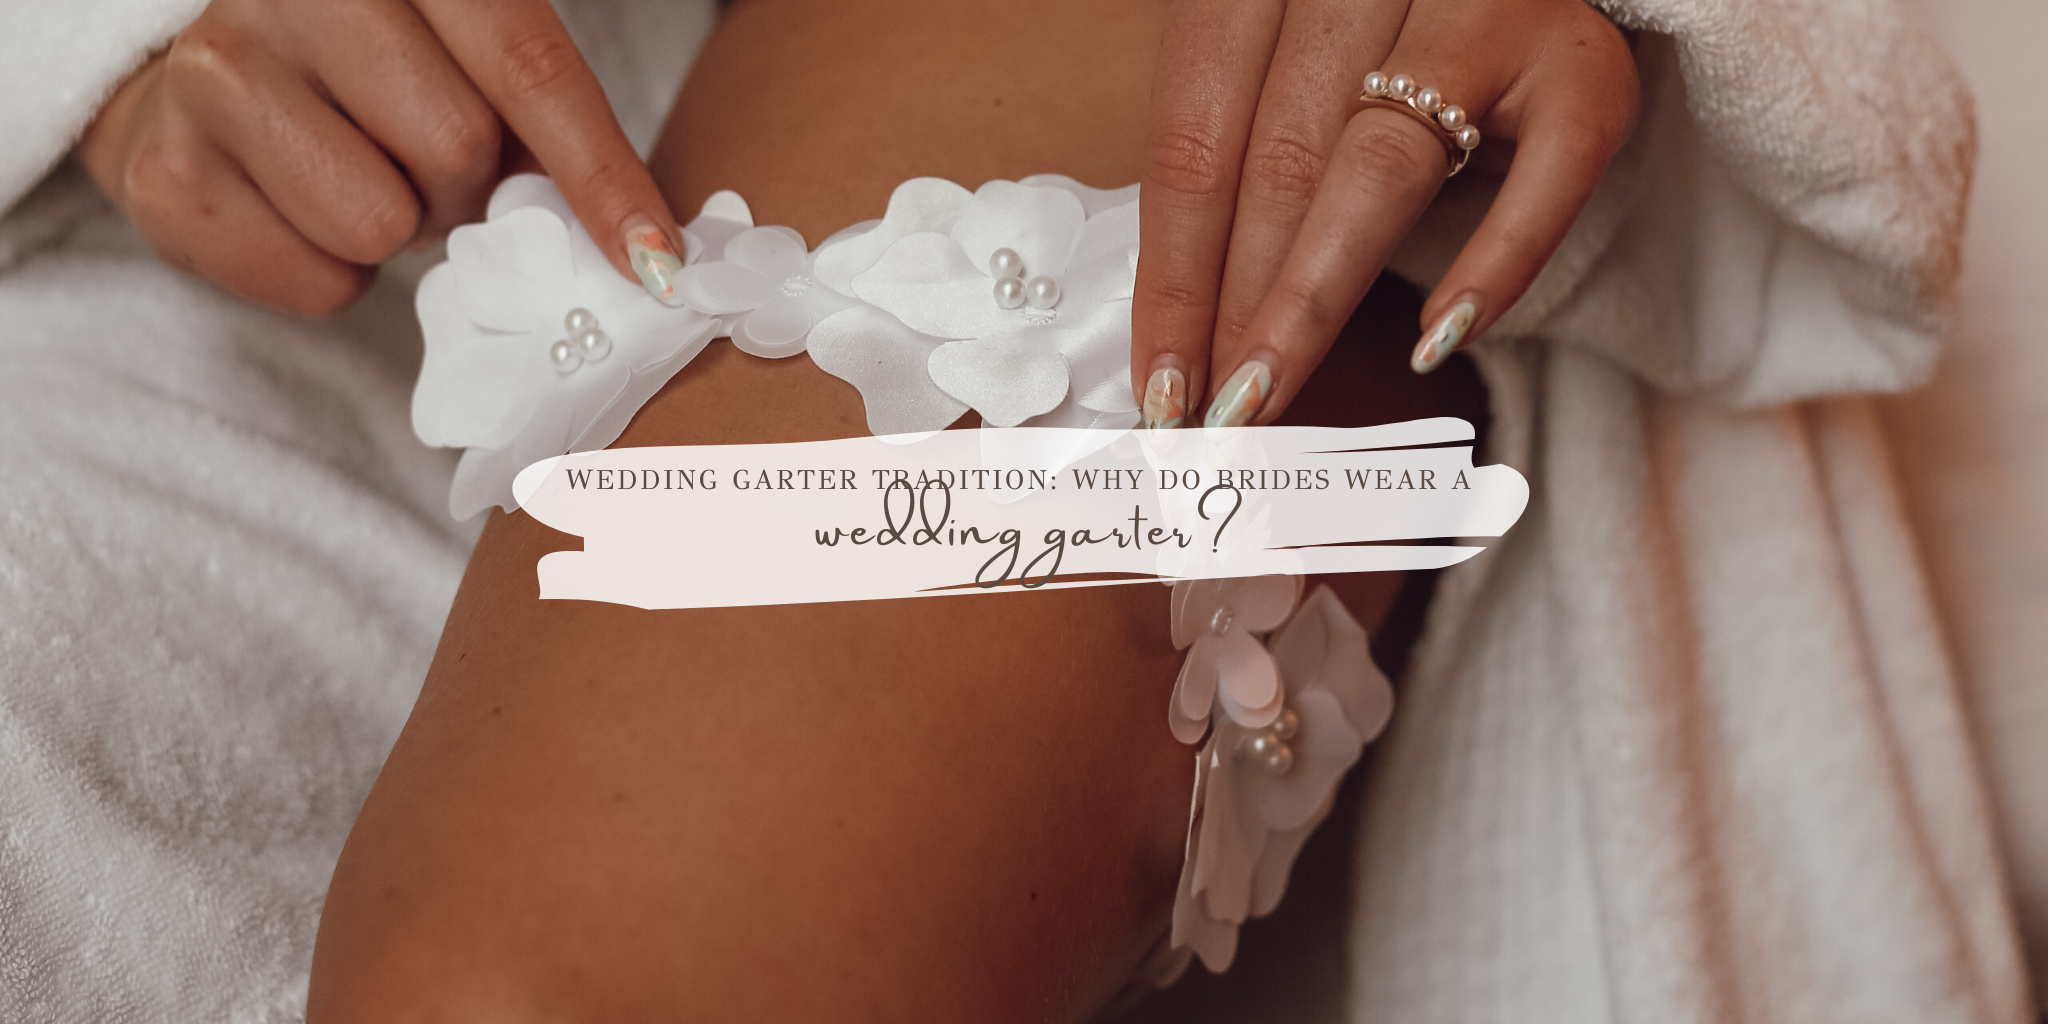 Garter removal Wedding Pictures - Garter removal Images From Real Weddings  and Couples!